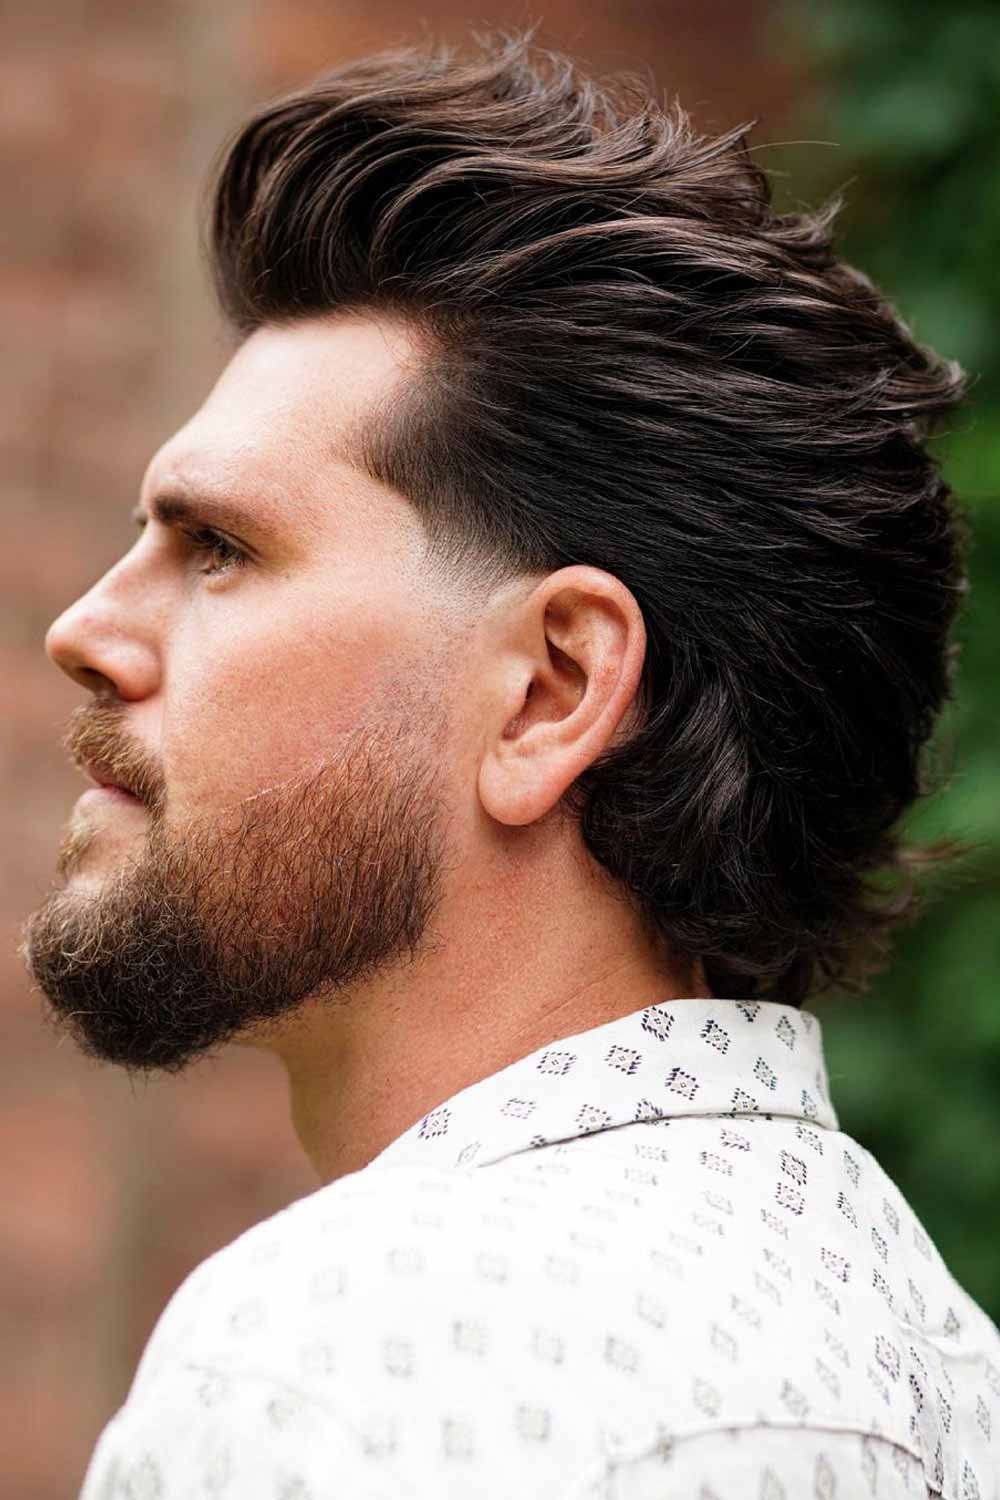 Classic Flow Hairstyle #flowhaircut #flowhairstyle #flowhair